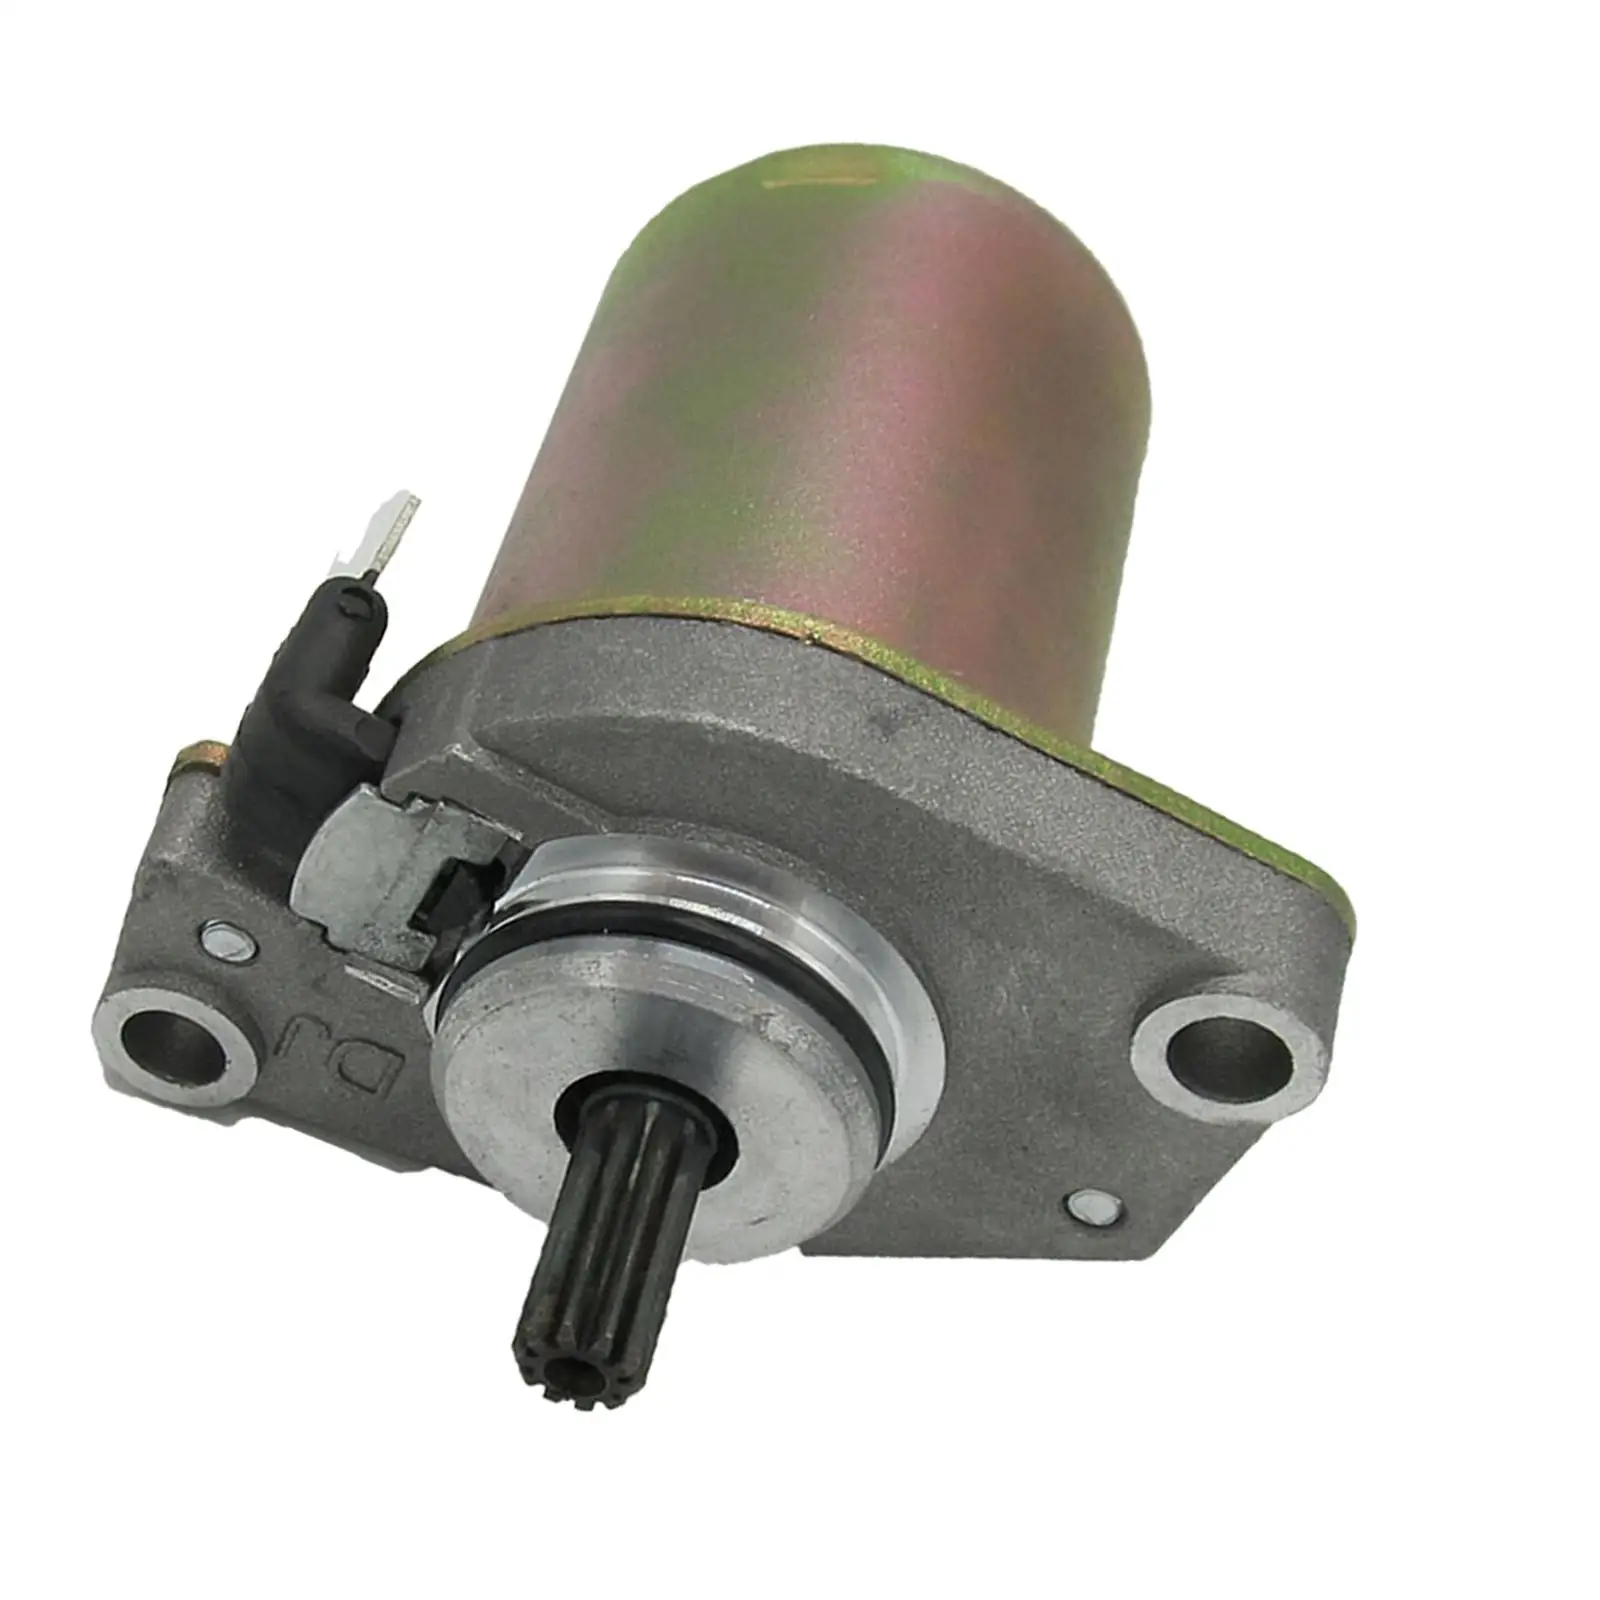 Starter Motor for Yamaha Jog 50cc Motorcycle Spare Parts Easy to Install